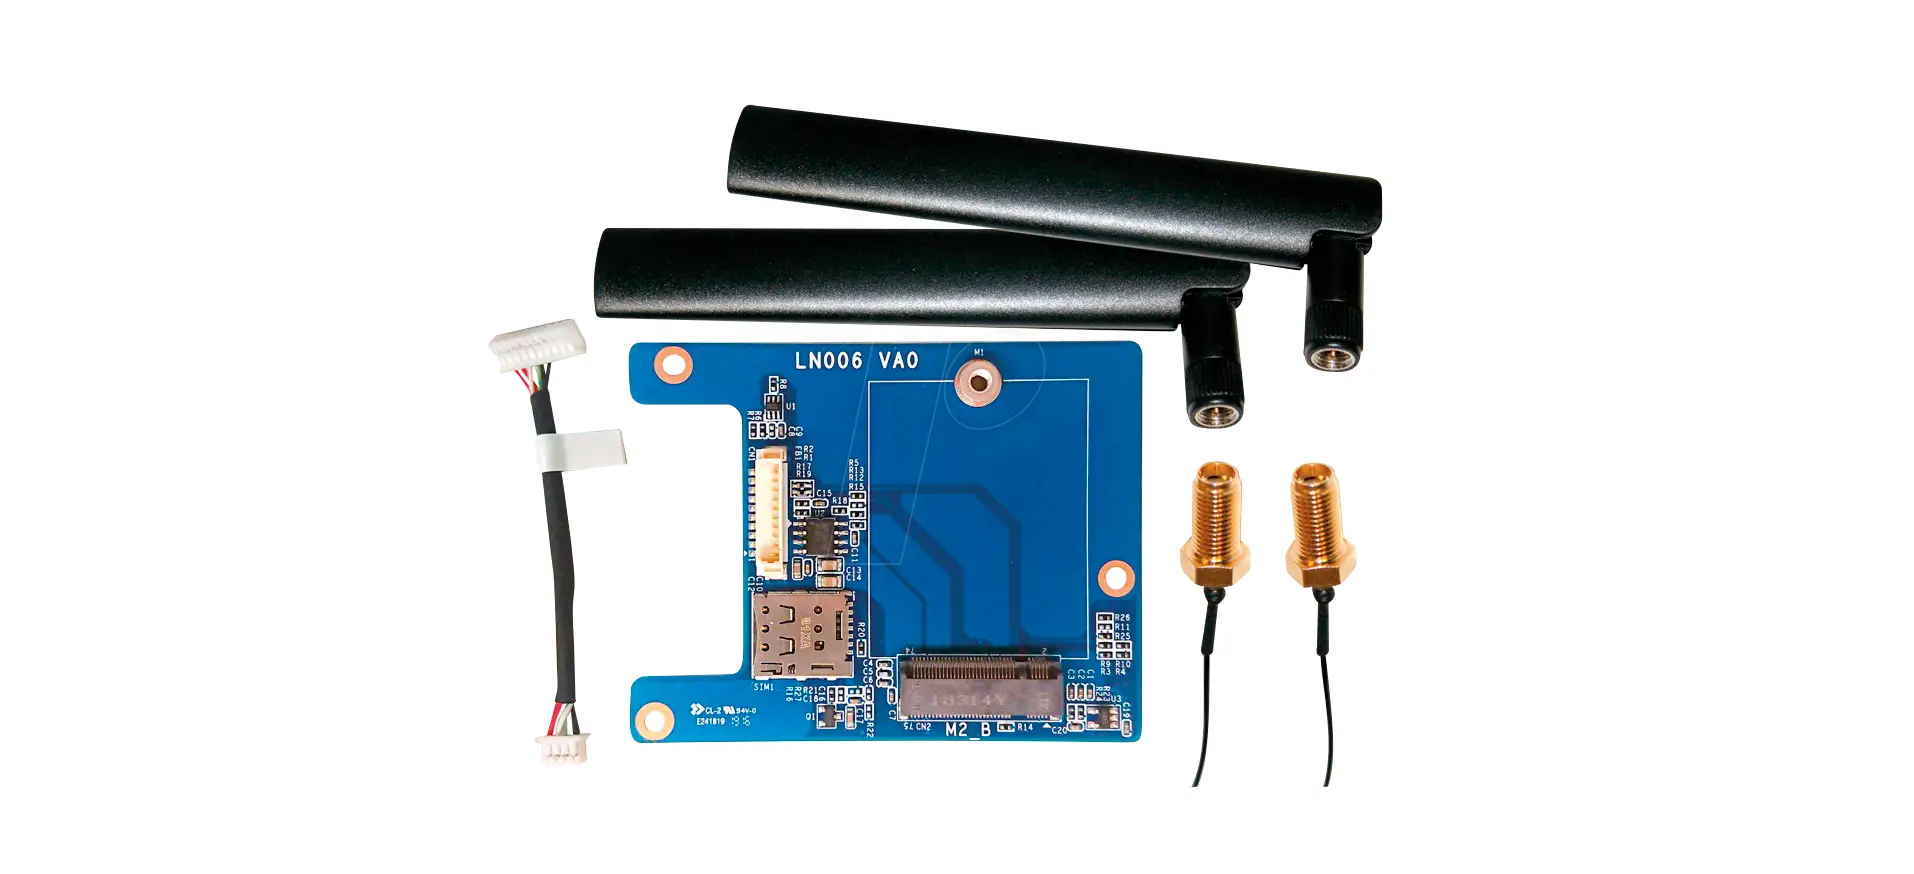 WWN03 Expansion Kit for LTE/4G Module and Nano SIM Card